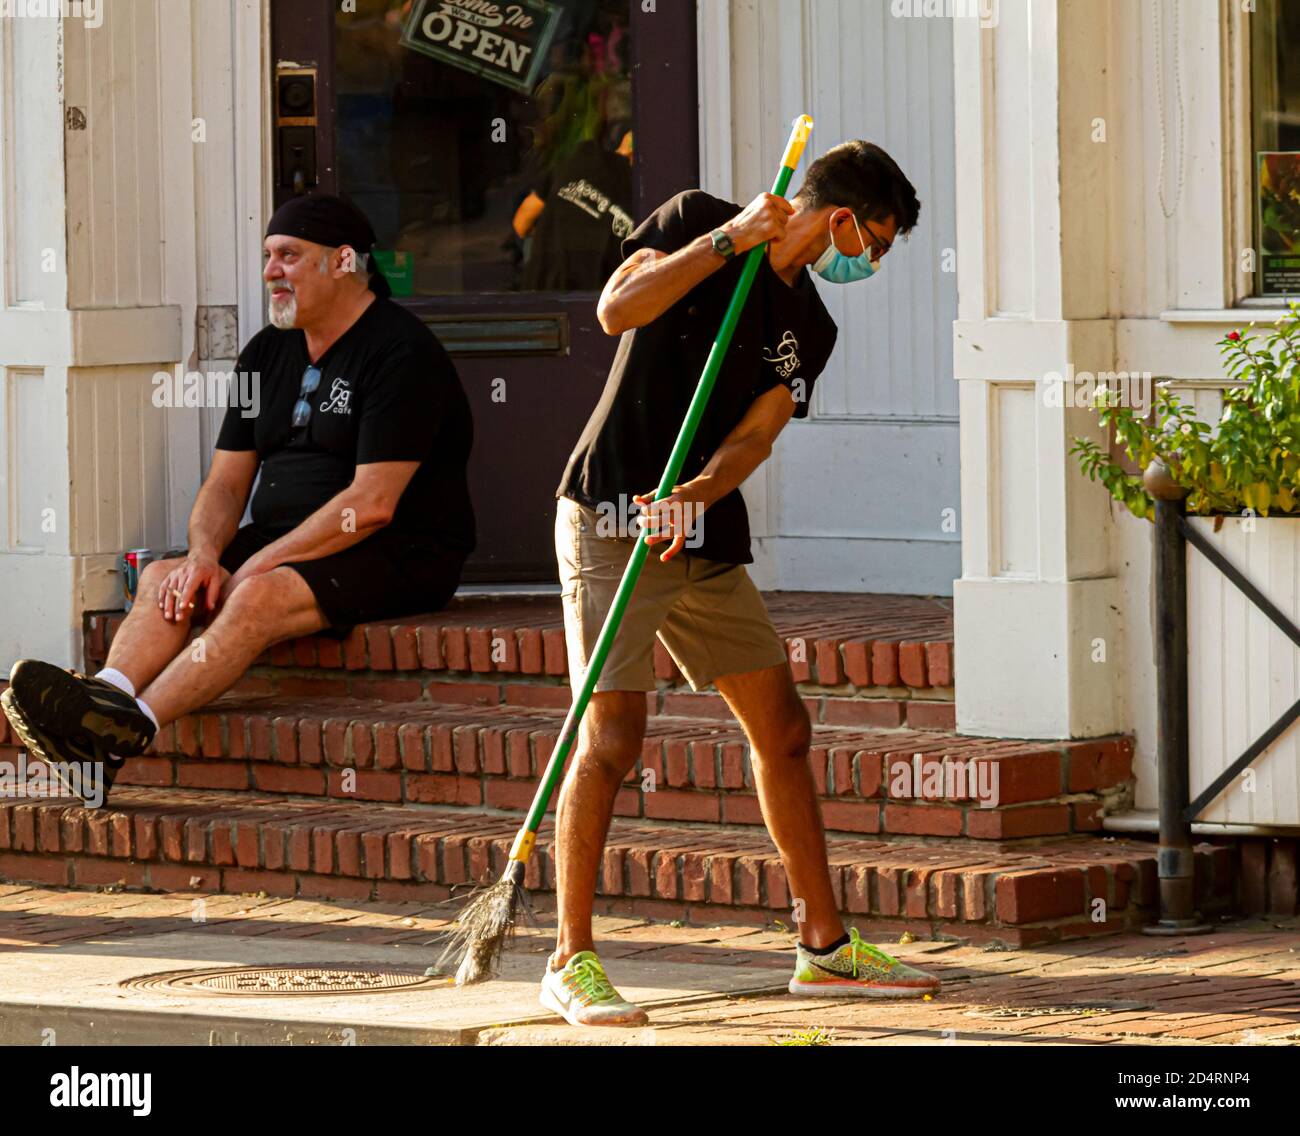 Ellicott City, MD, USA 10/07/2020: A young hispanic janitorial worker wearing face mask due to COVID is sweeping the floor in front of the shop. His c Stock Photo